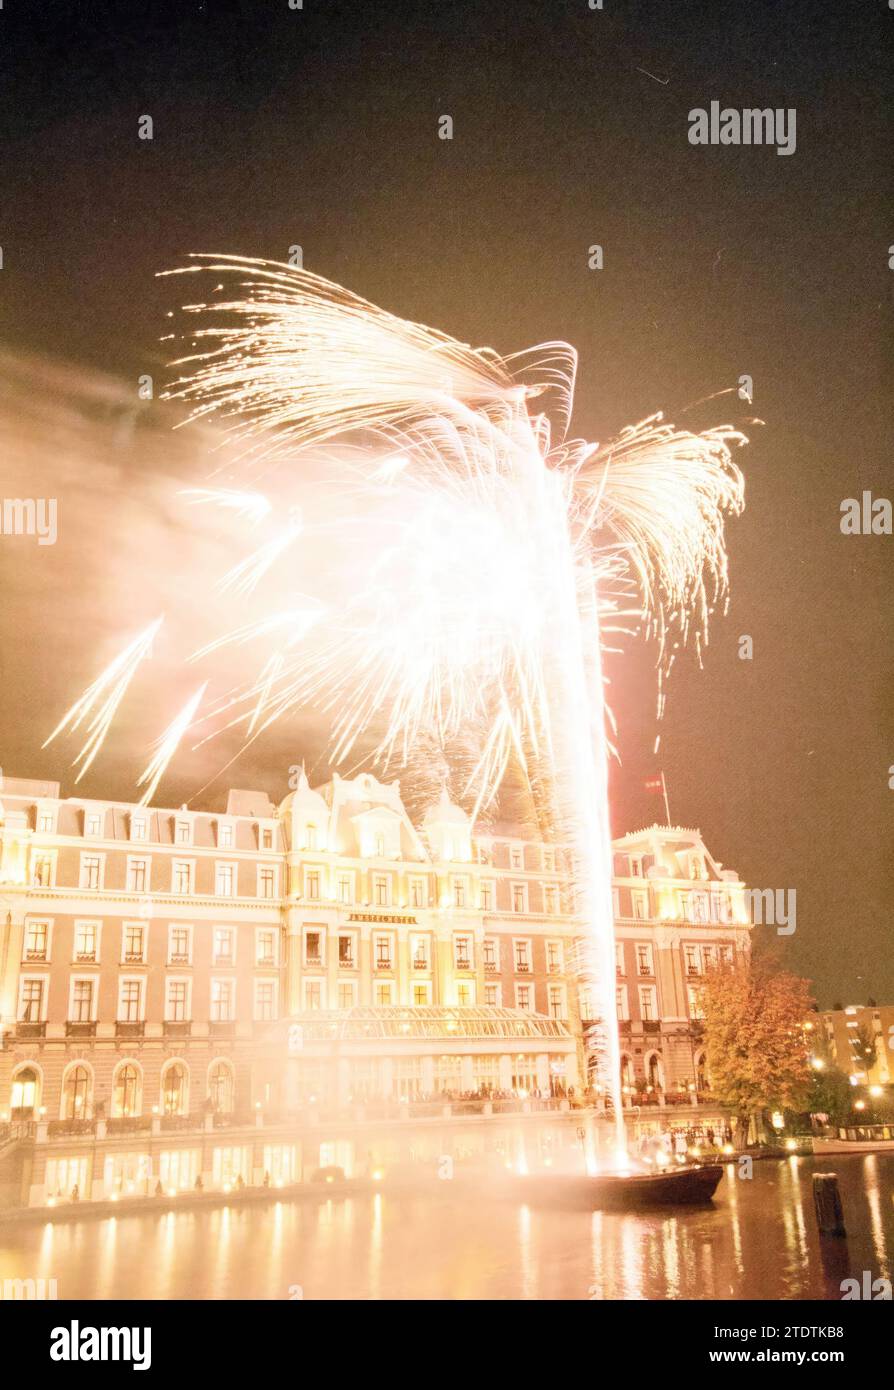 Fireworks, Whizgle News from the Past, Tailored for the Future. Explore historical narratives, Dutch The Netherlands agency image with a modern perspective, bridging the gap between yesterday's events and tomorrow's insights. A timeless journey shaping the stories that shape our future Stock Photo